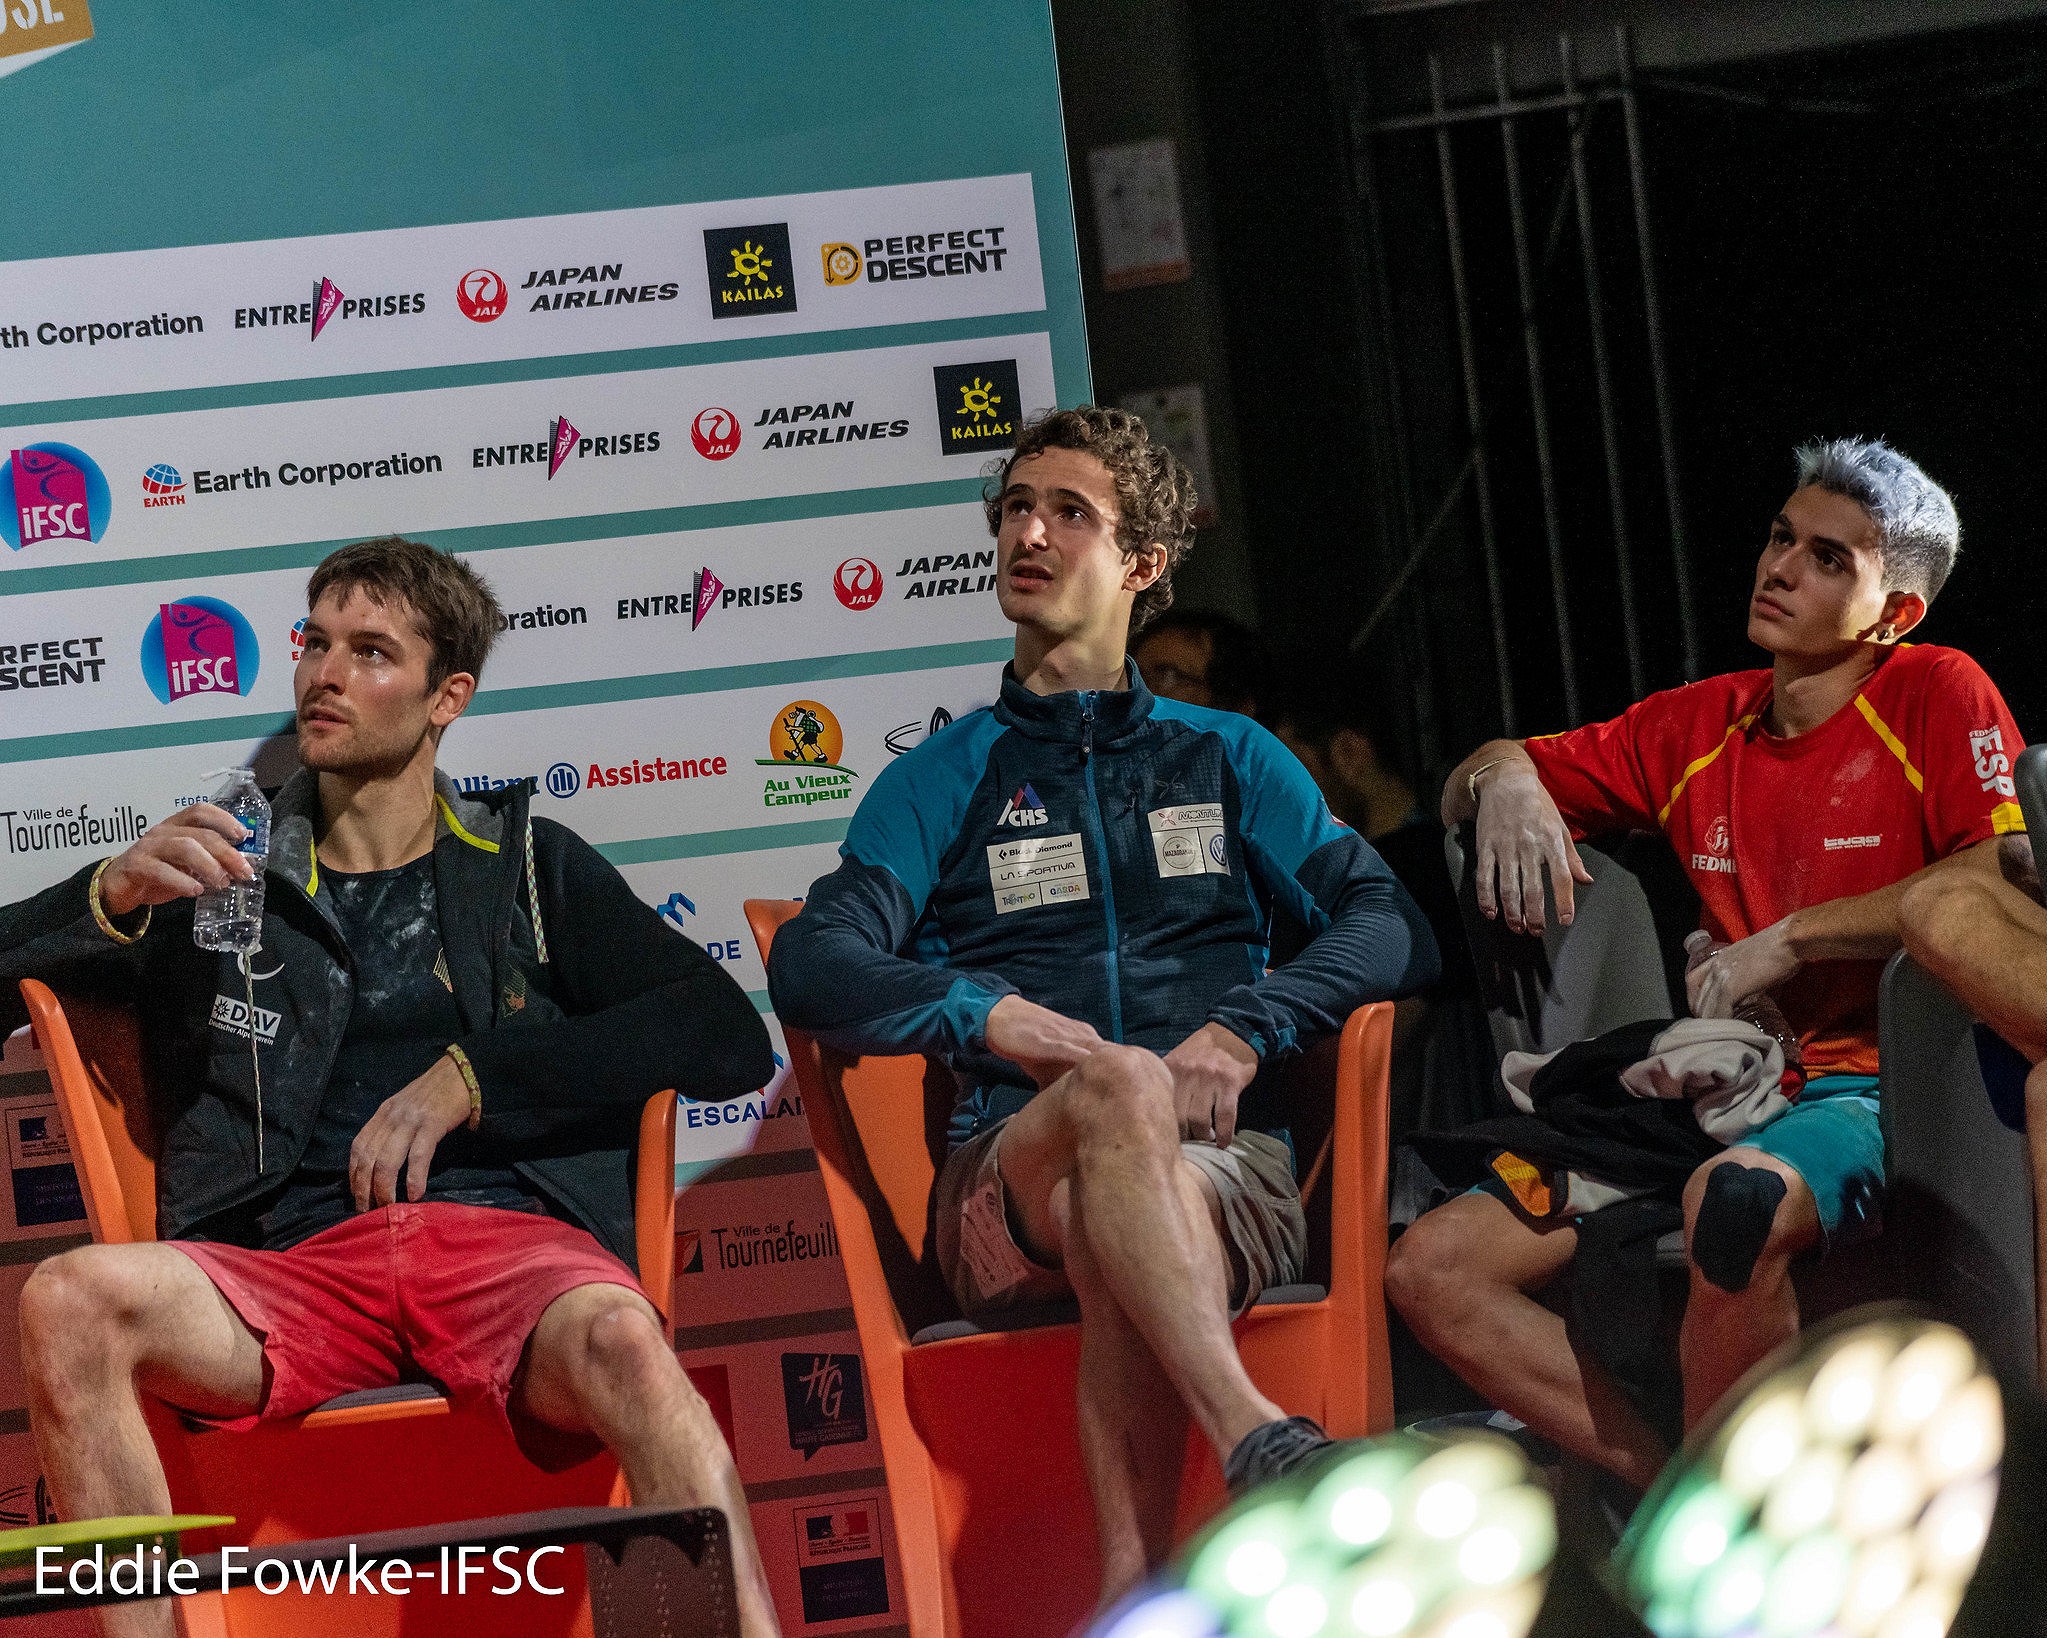 With so much riding on each competitor's ranking, all eyes were on the Lead wall.  © Eddie Fowke/IFSC